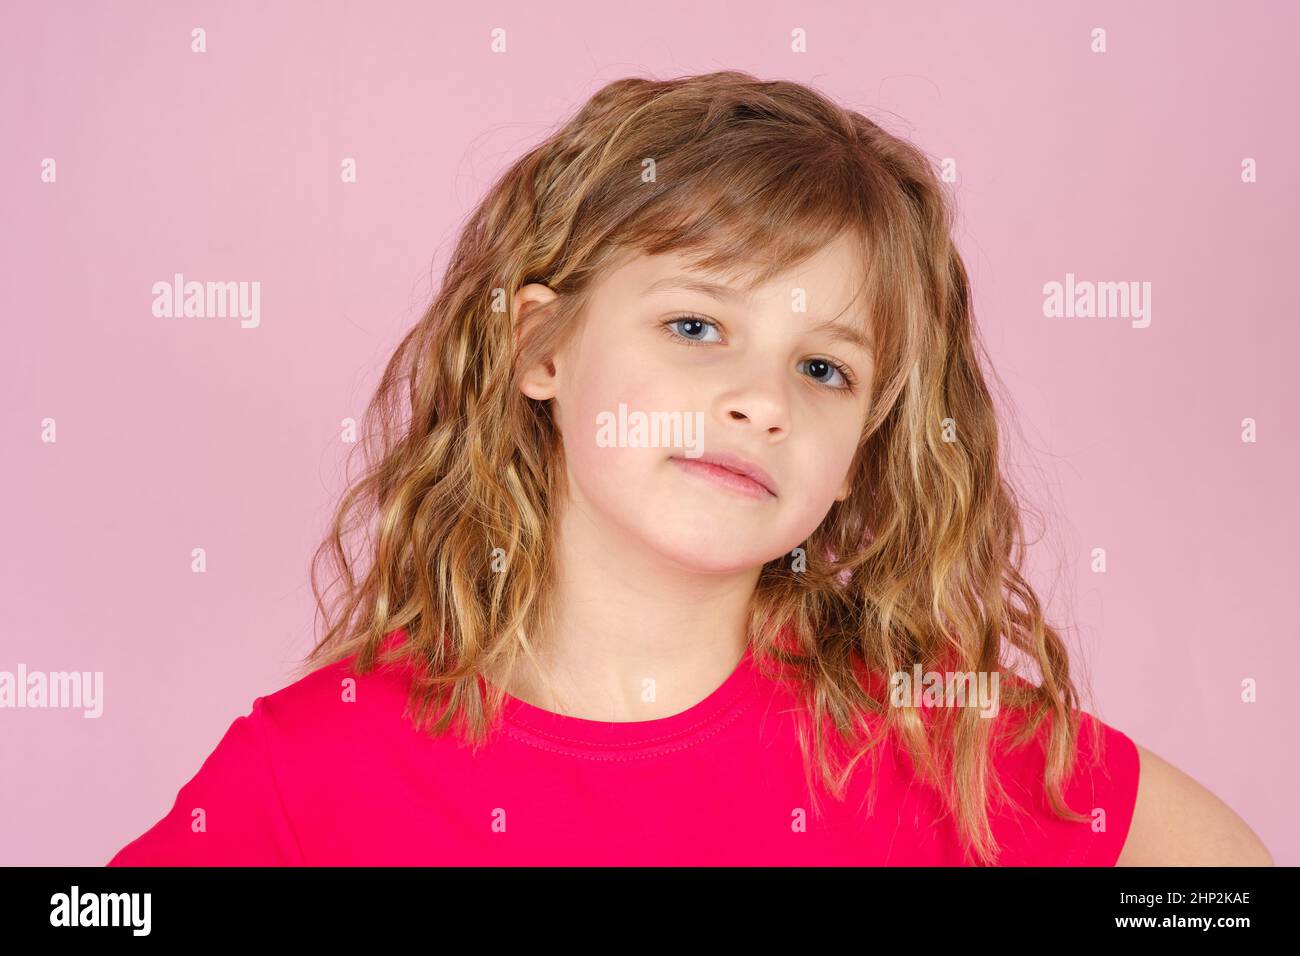 Close-up portrait of adorable little girl in studio Stock Photo